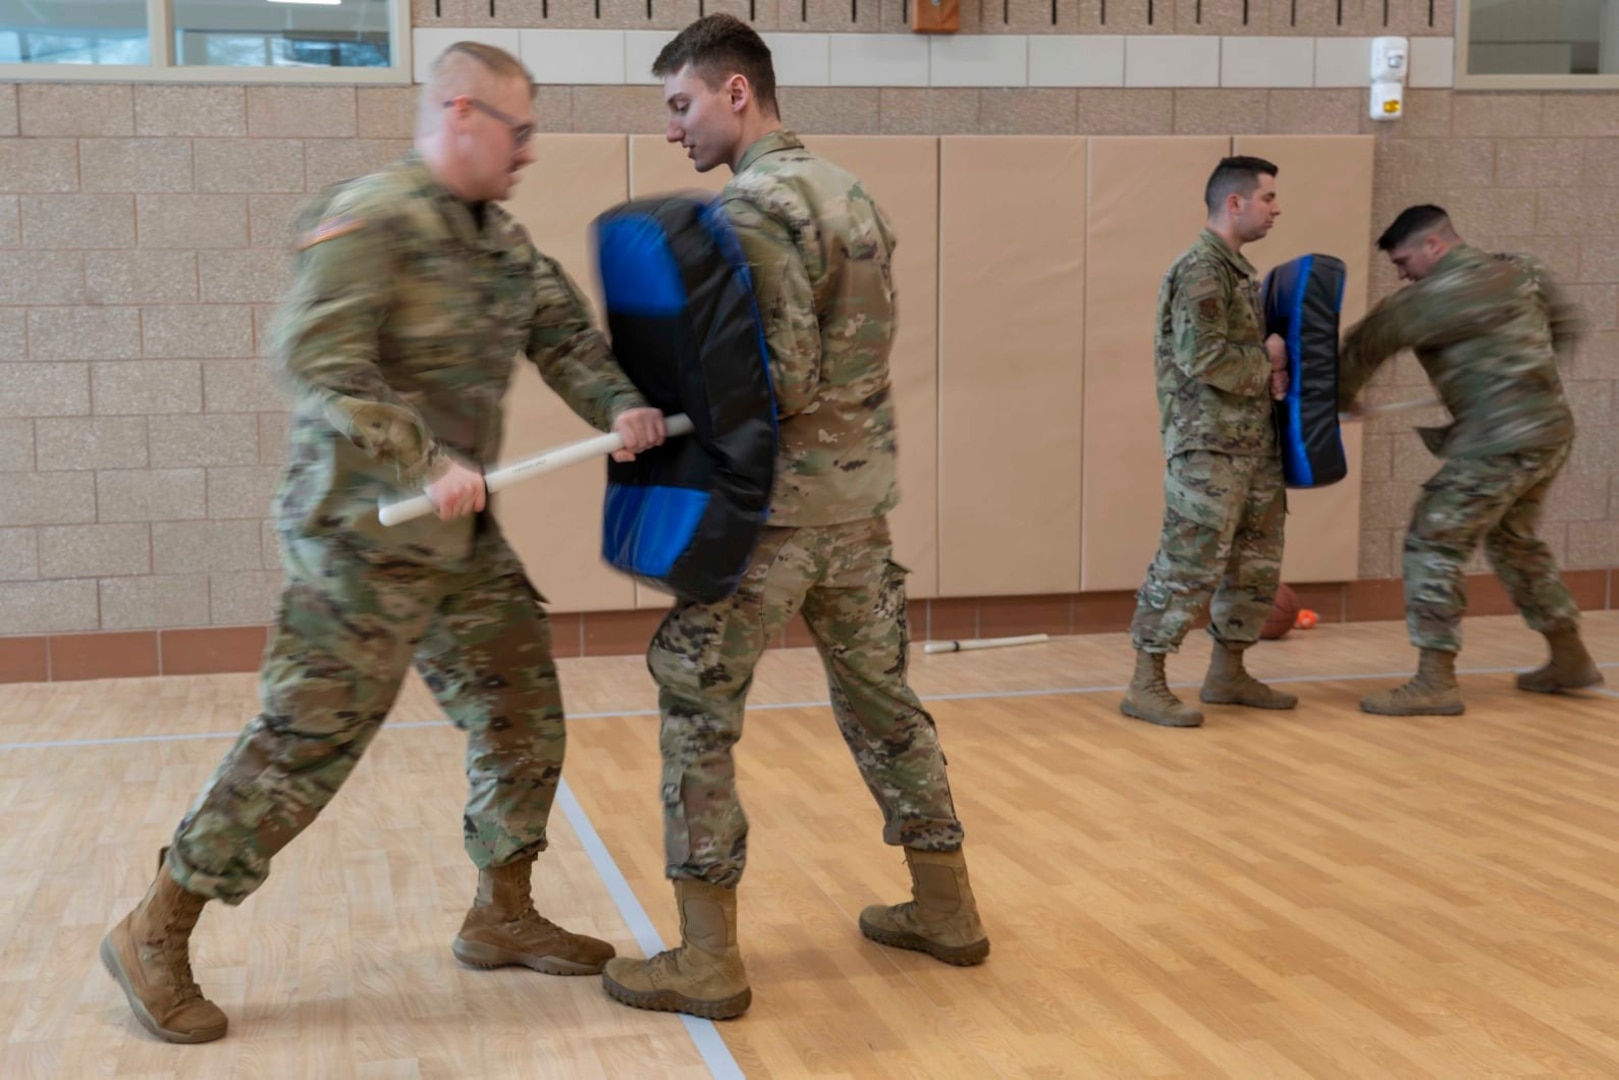 From left, Spc. Jeremy Wilkens and Spc. Greg Marquis of the 237th Military Police Company, New Hampshire Army National Guard, practice baton tactics Jan. 7, 2022, at the Edward Cross Training Center in Pembroke, New Hampshire.